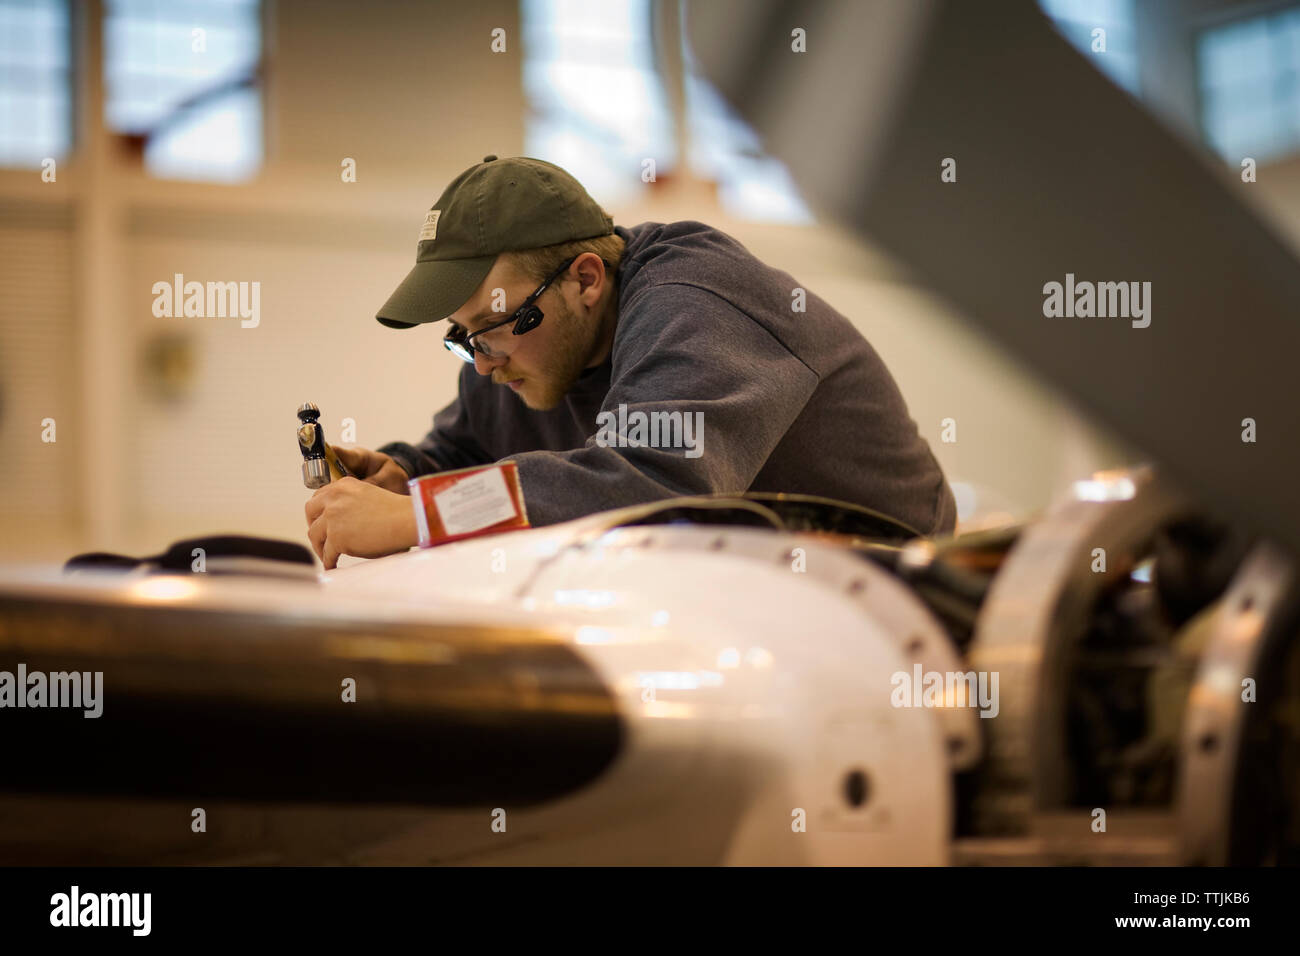 Side view of man working in aerospace industry Stock Photo